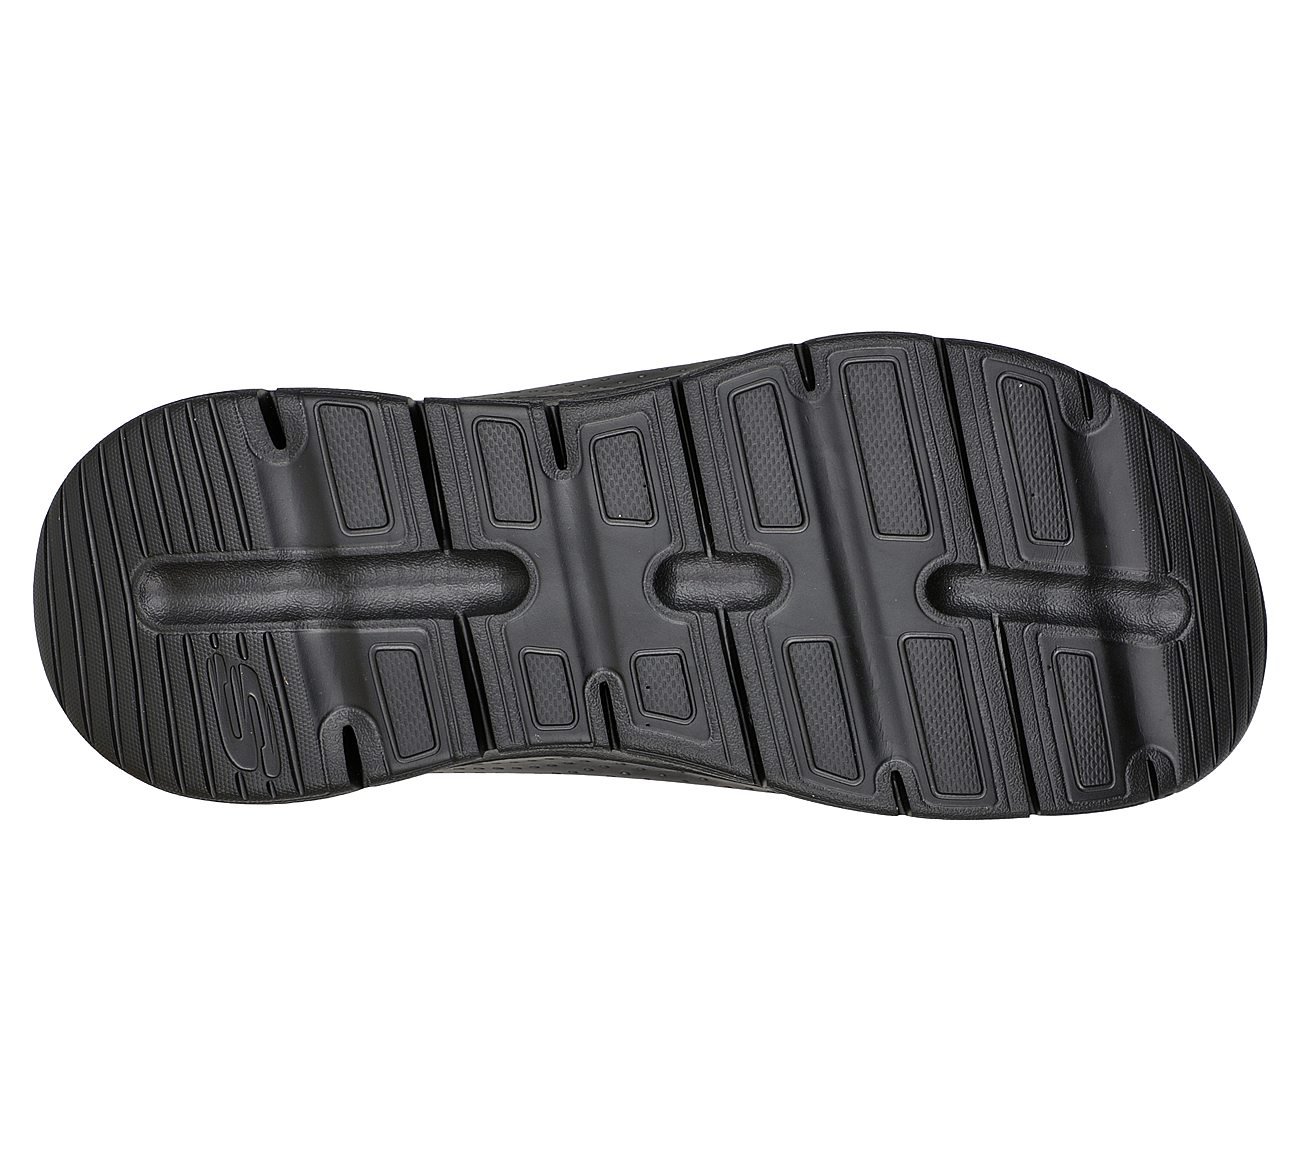 ARCH FIT, BBLACK Footwear Bottom View